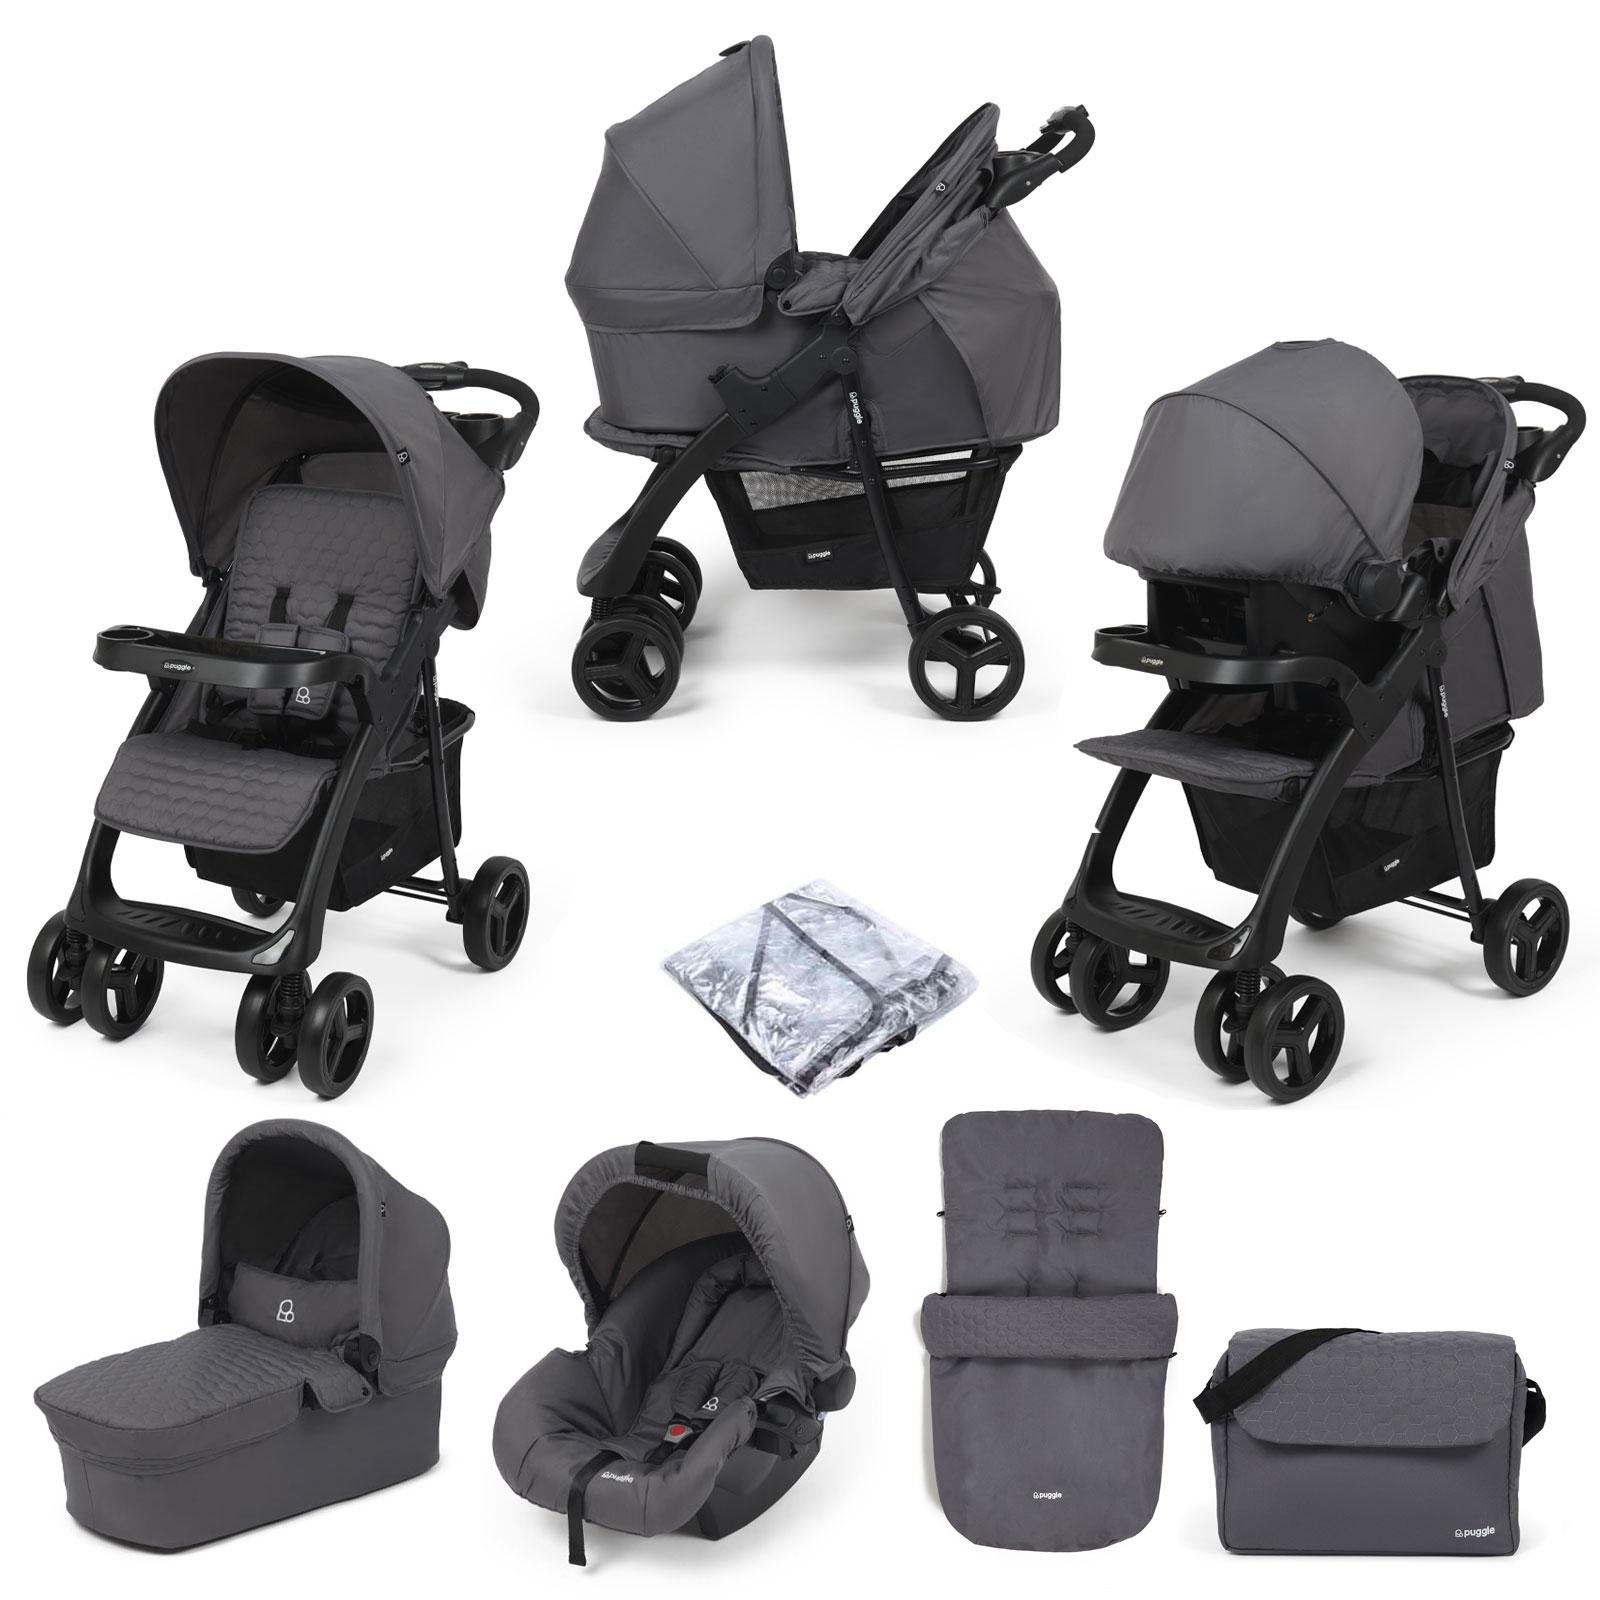 Puggle Denver Luxe 3in1 Travel System with Raincover, Footmuff & Changing Bag - Slate Grey